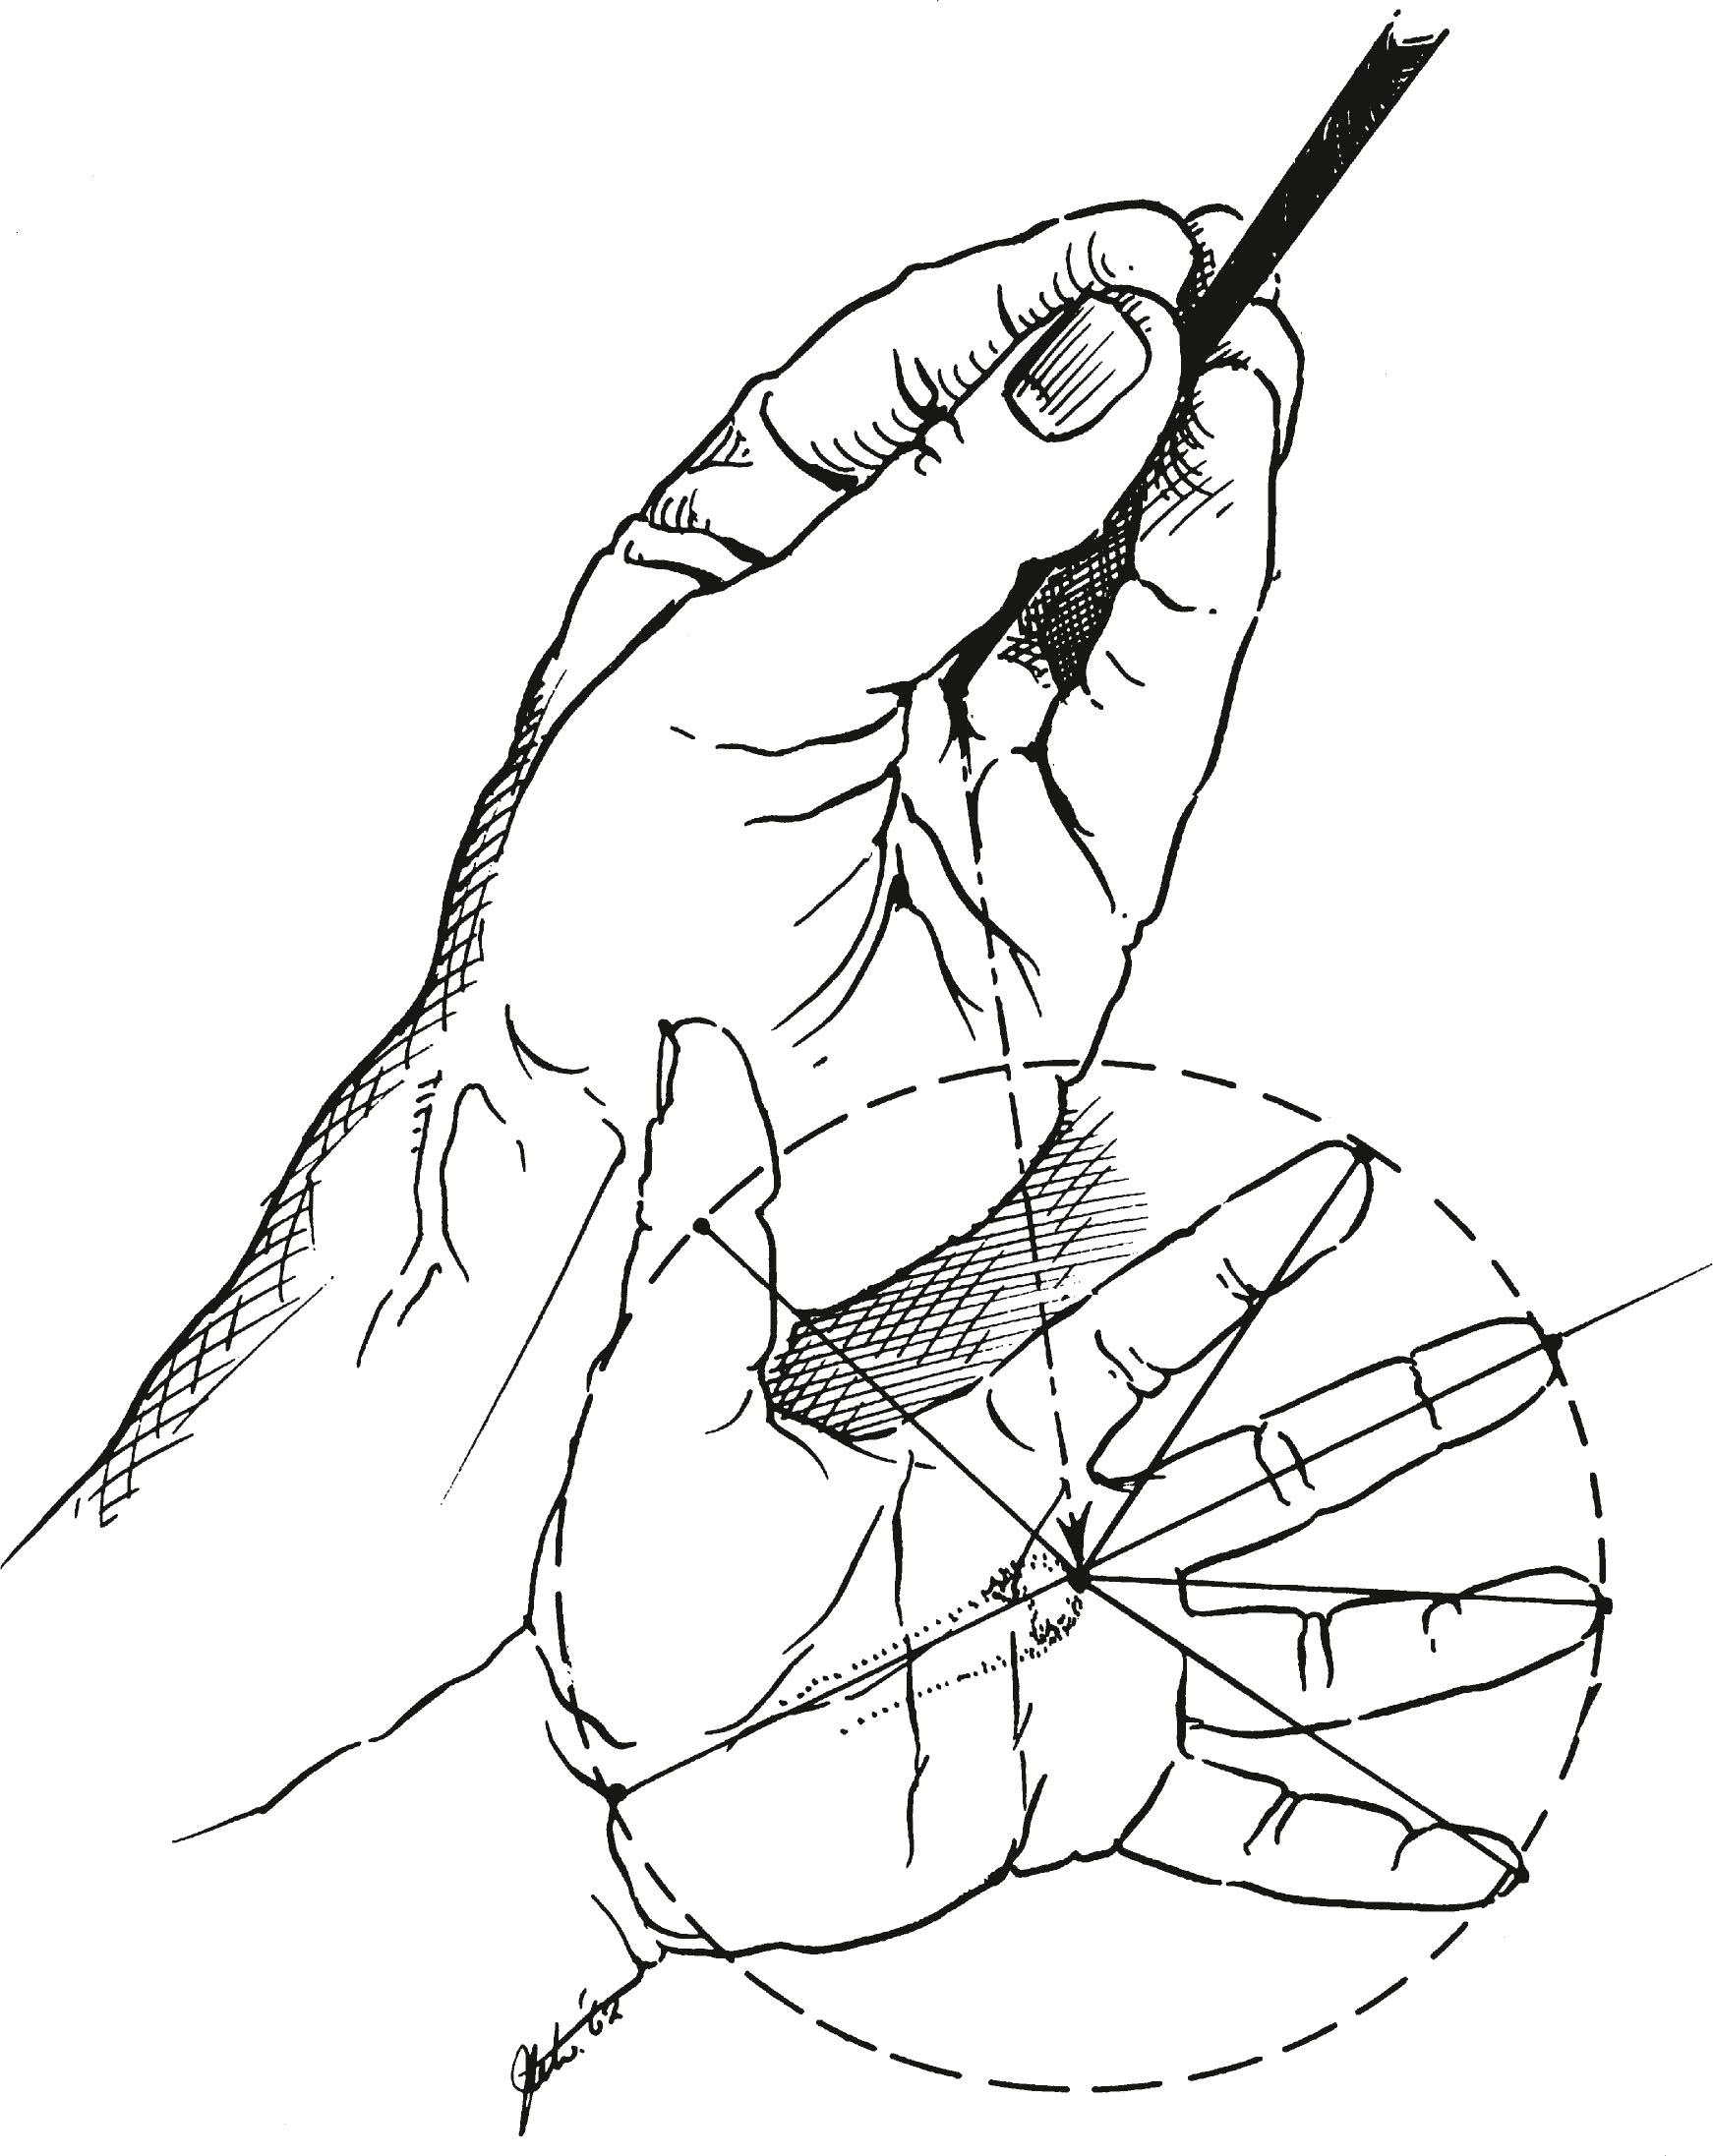 Figure 1.8, When the adaptive arch is semicircular, the fingers converge in a cone over the anatomic center of the hand – the long-finger metacarpophalangeal joint.